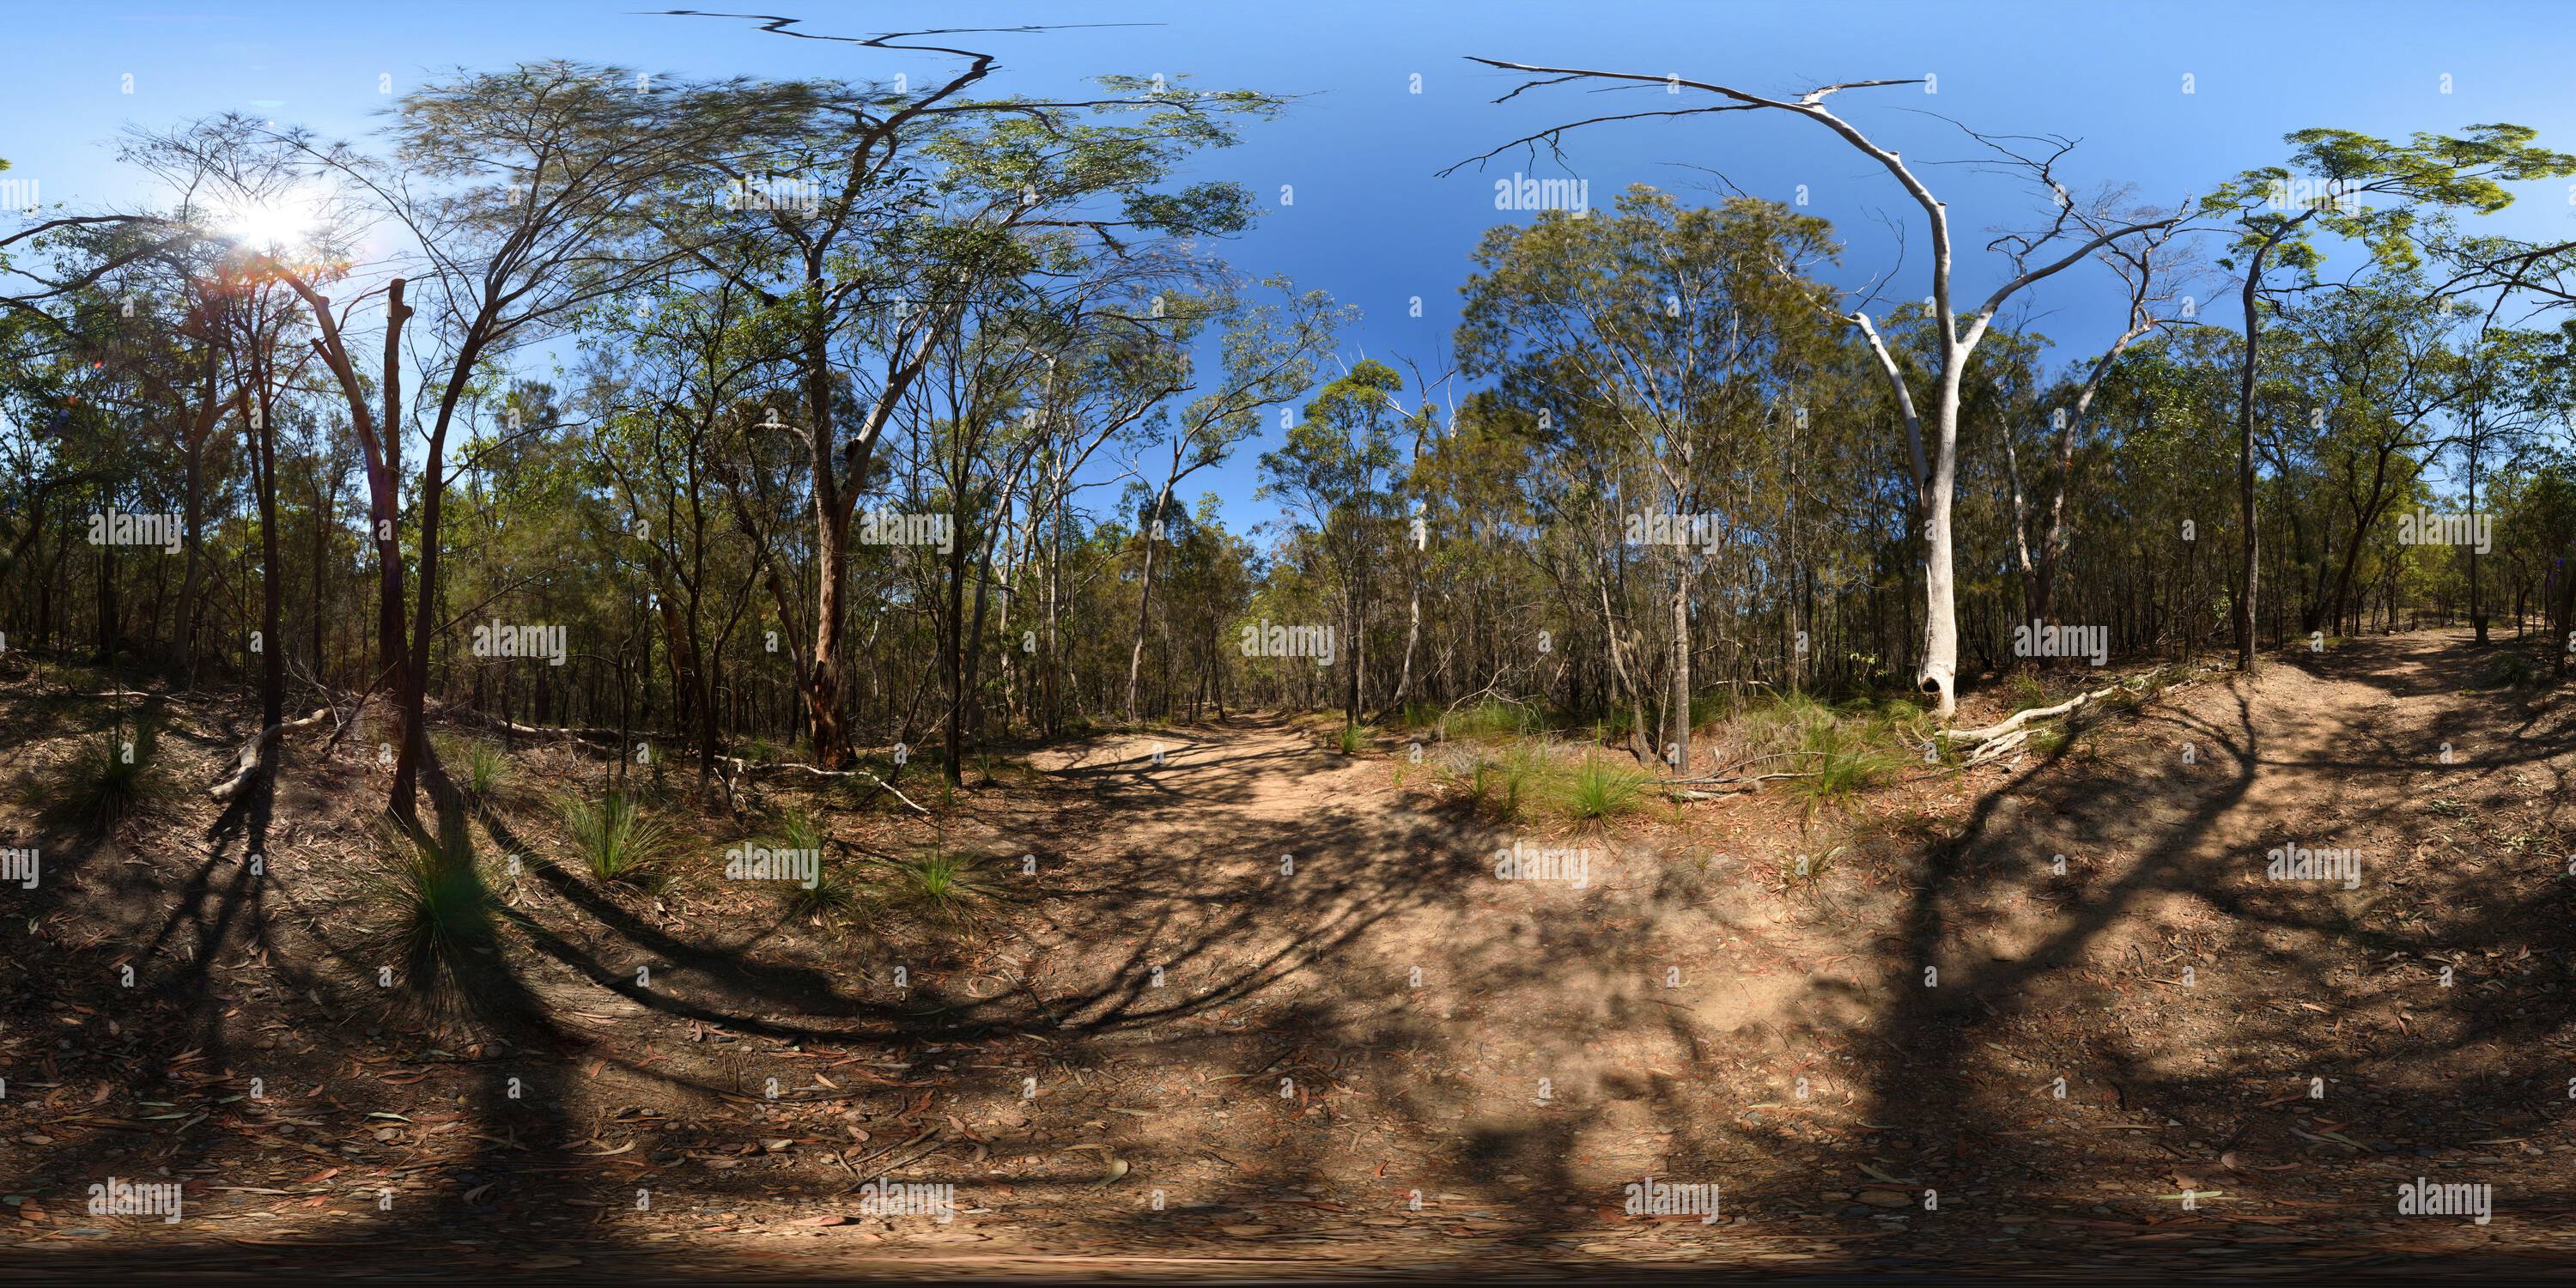 360 degree panoramic view of 360° panorama On the Gully Track, Seven Hills Bushland Reserve, Eucalyptus and small Xanthorrhoea, Brisbane, Queensland